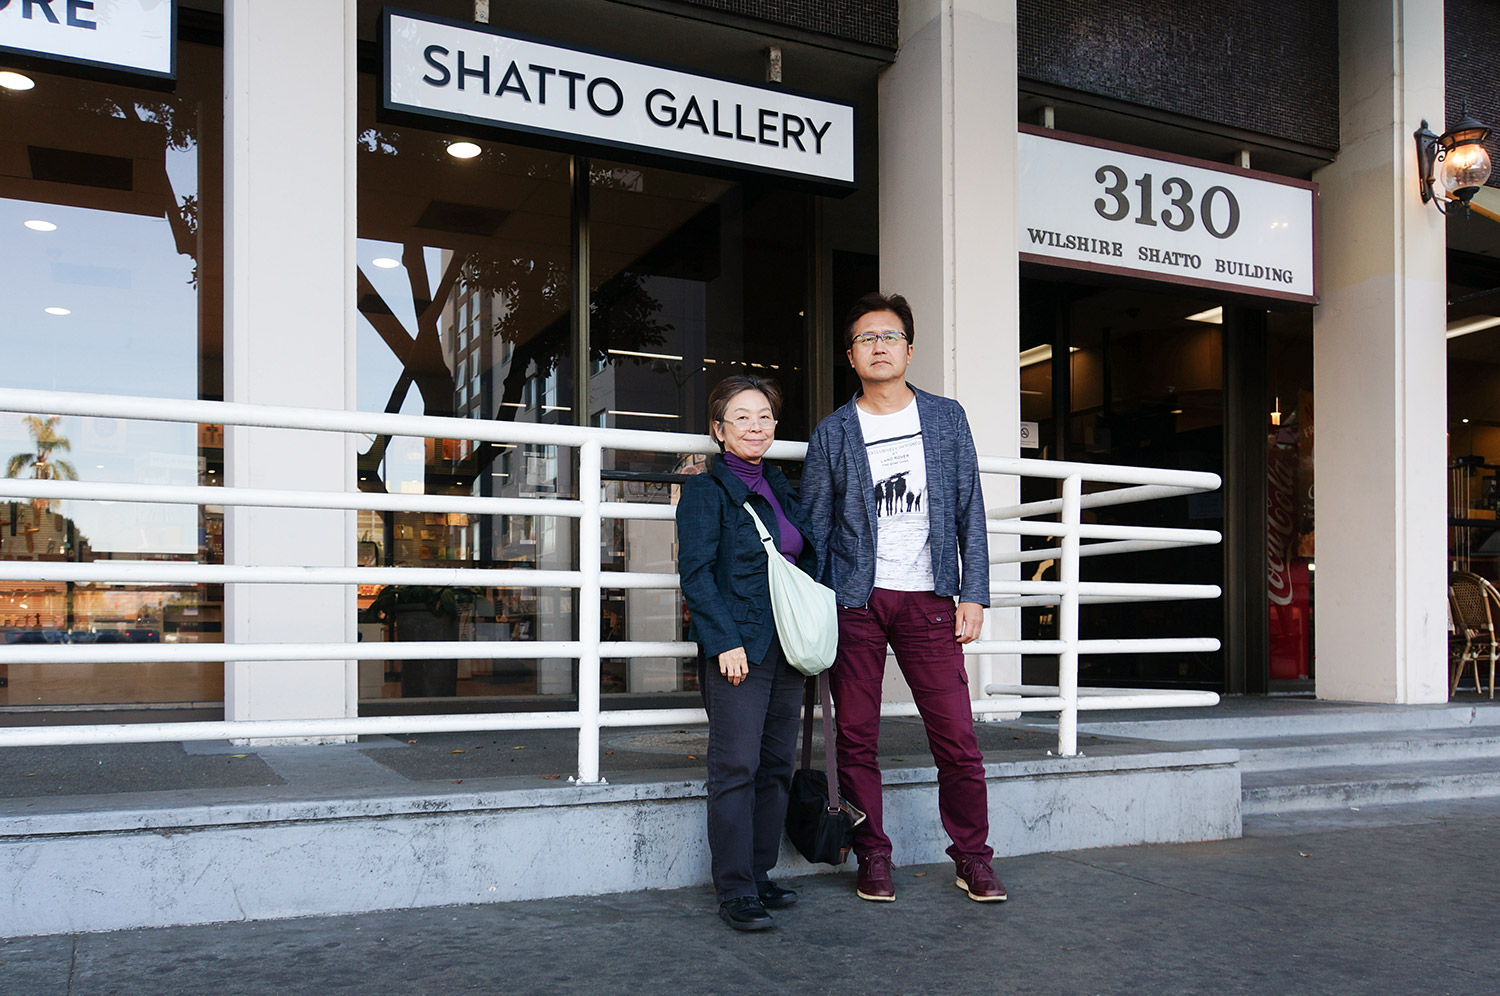 THE OPENING DAY OF SHATTO GALLERY